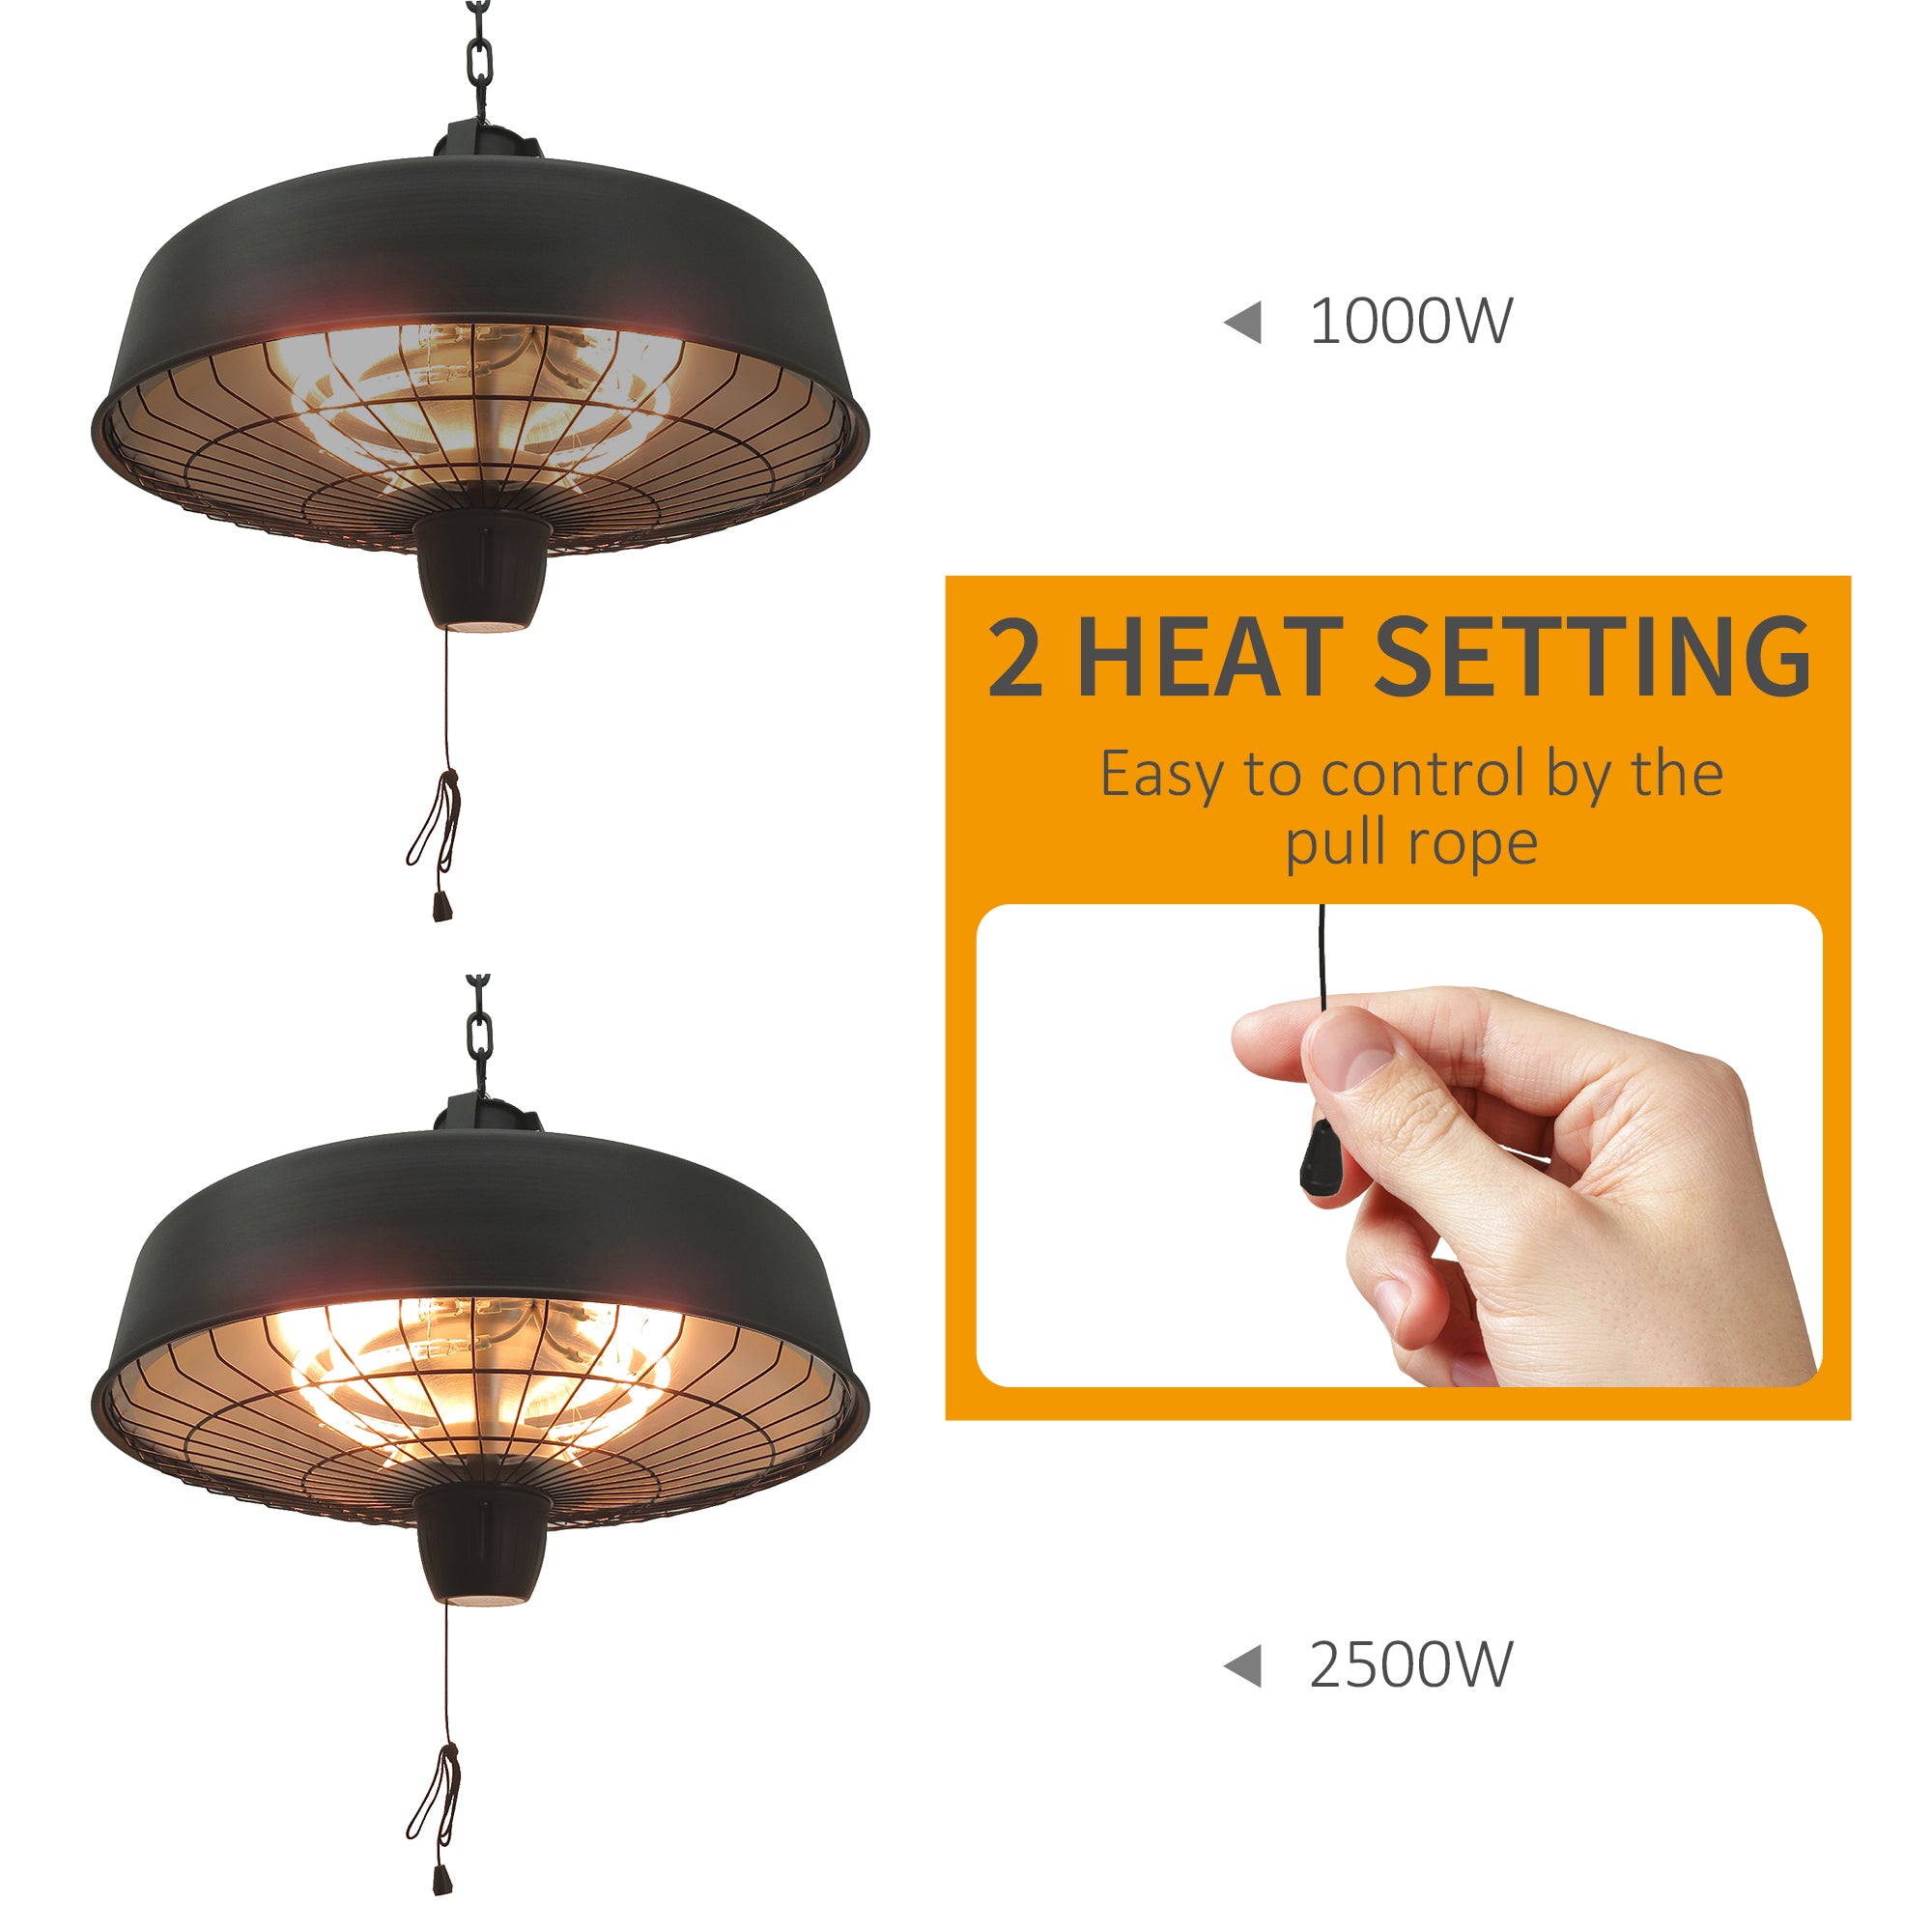 Outsunny Adjustable Power 1000/2500W Infrared Halogen Electric Light Heater, Ceiling Hanging Mount -Black - Inspirely